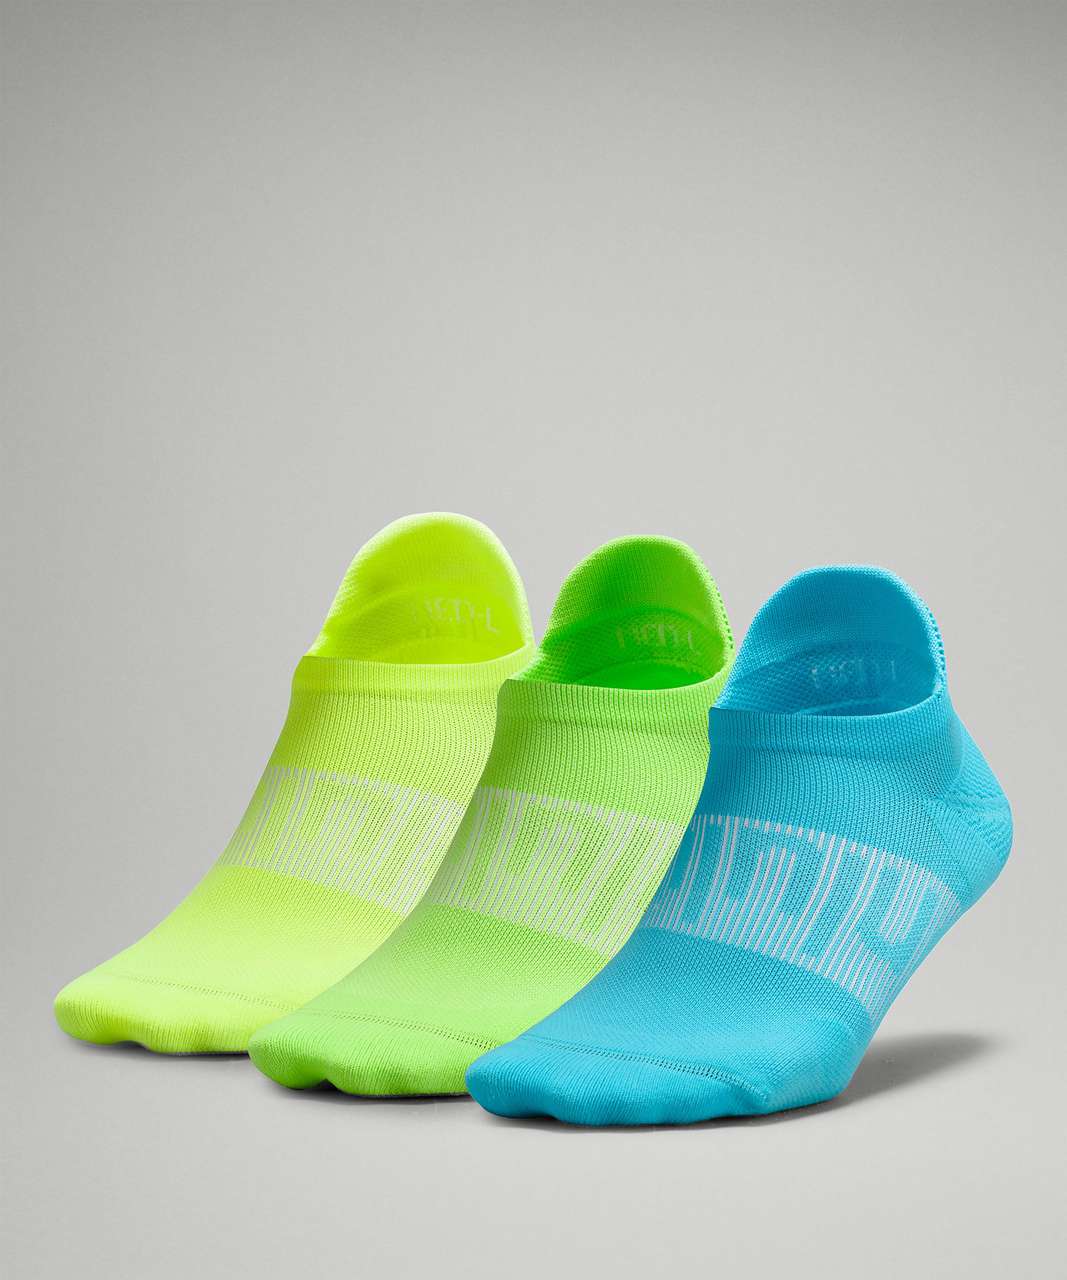 Lululemon Power Stride Tab Sock 3 Pack - Electric Turquoise / Absinthe / Highlight Yellow